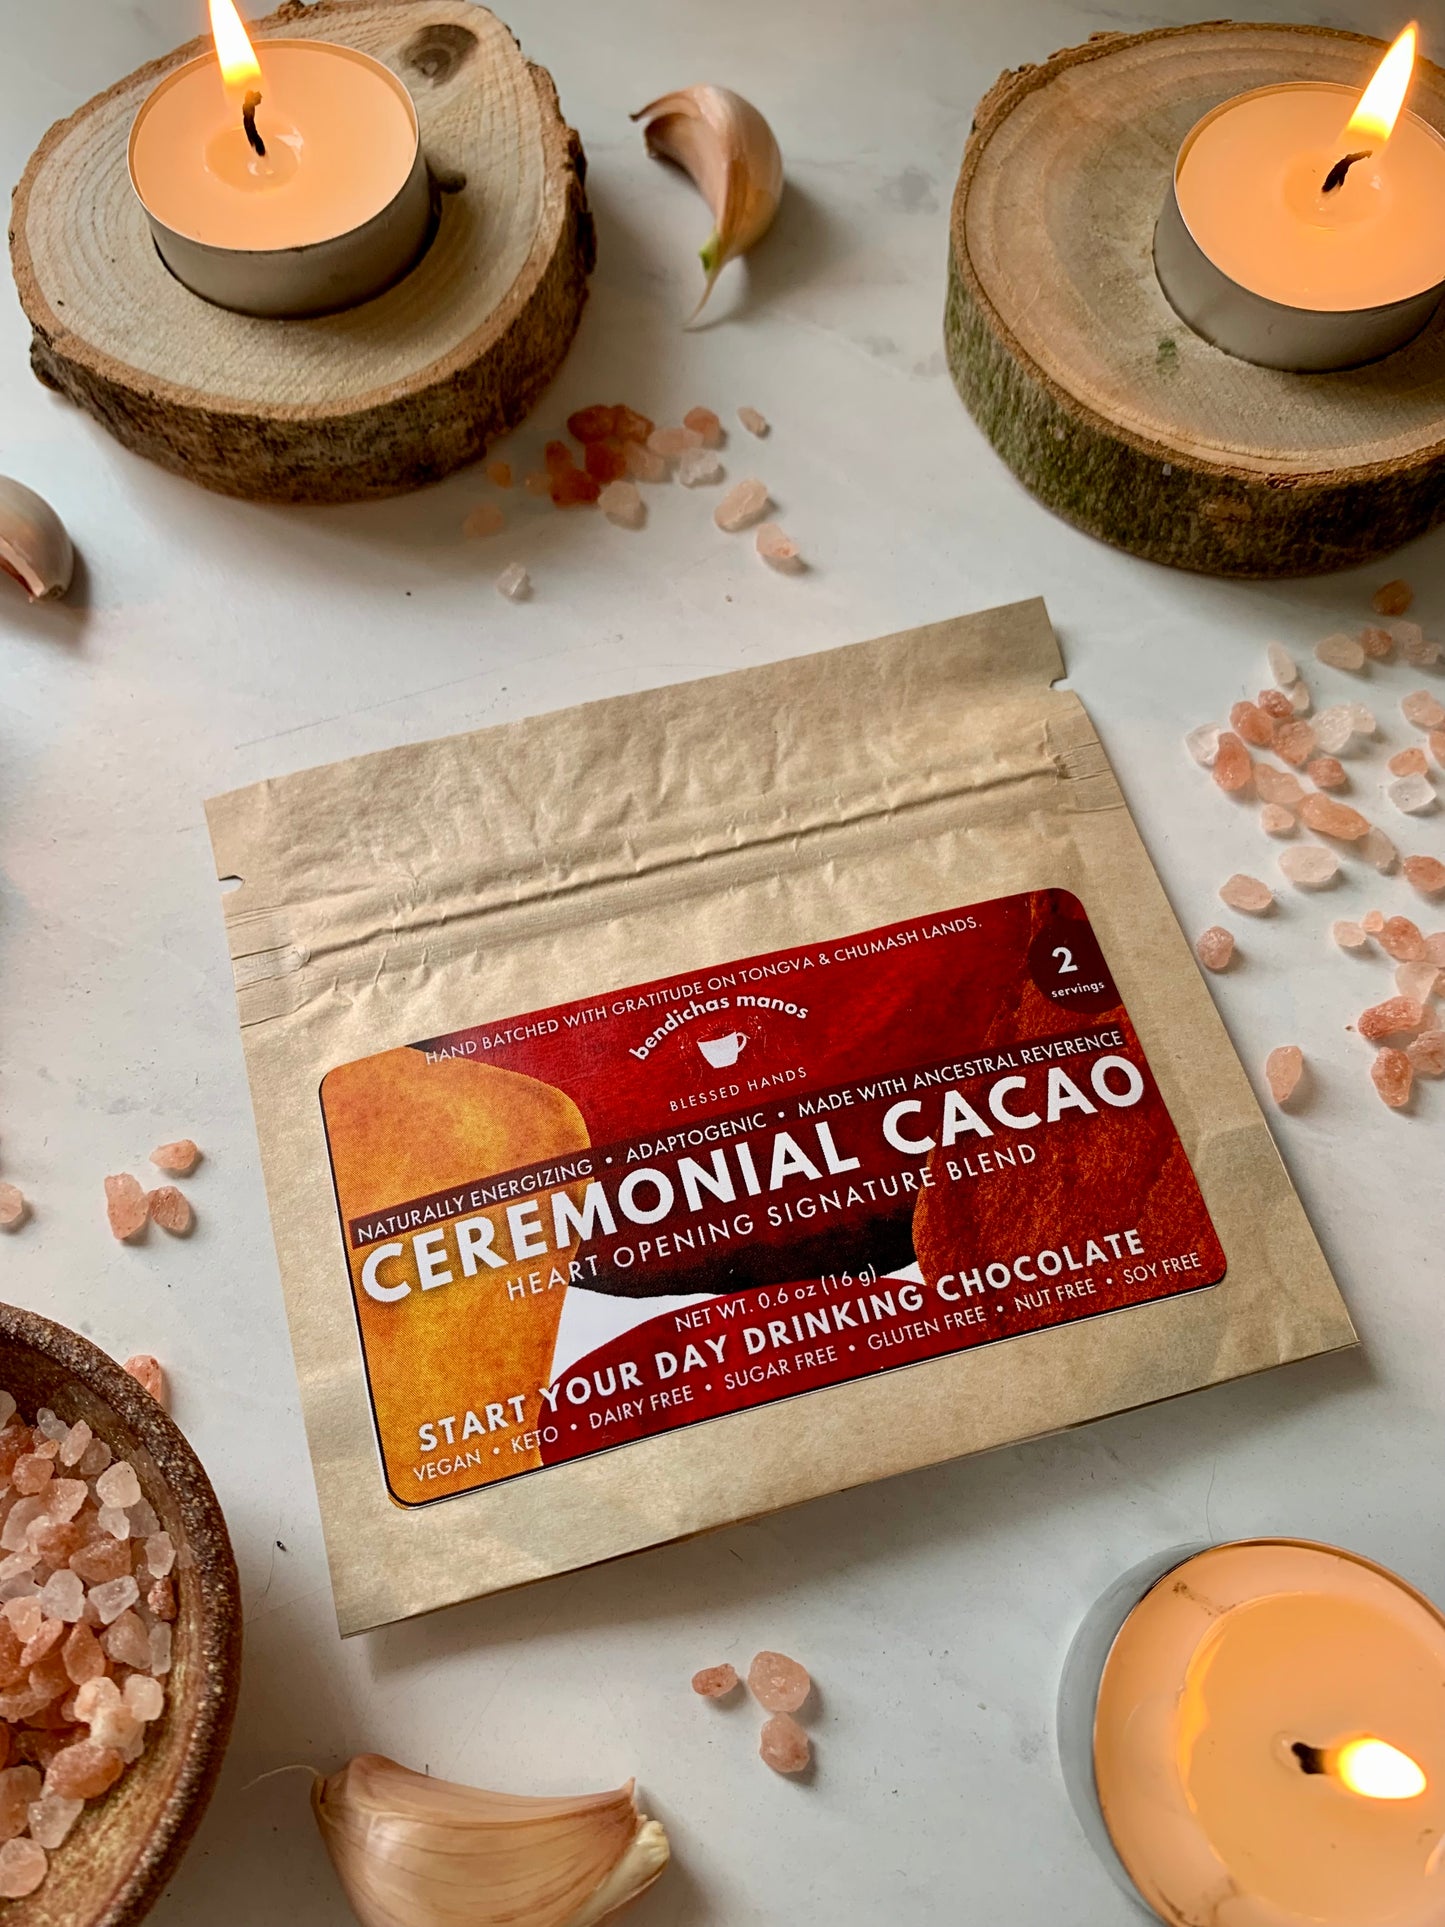 Load image into Gallery viewer, Ceremonial Cacao: Signature Blend (Gift Size)
